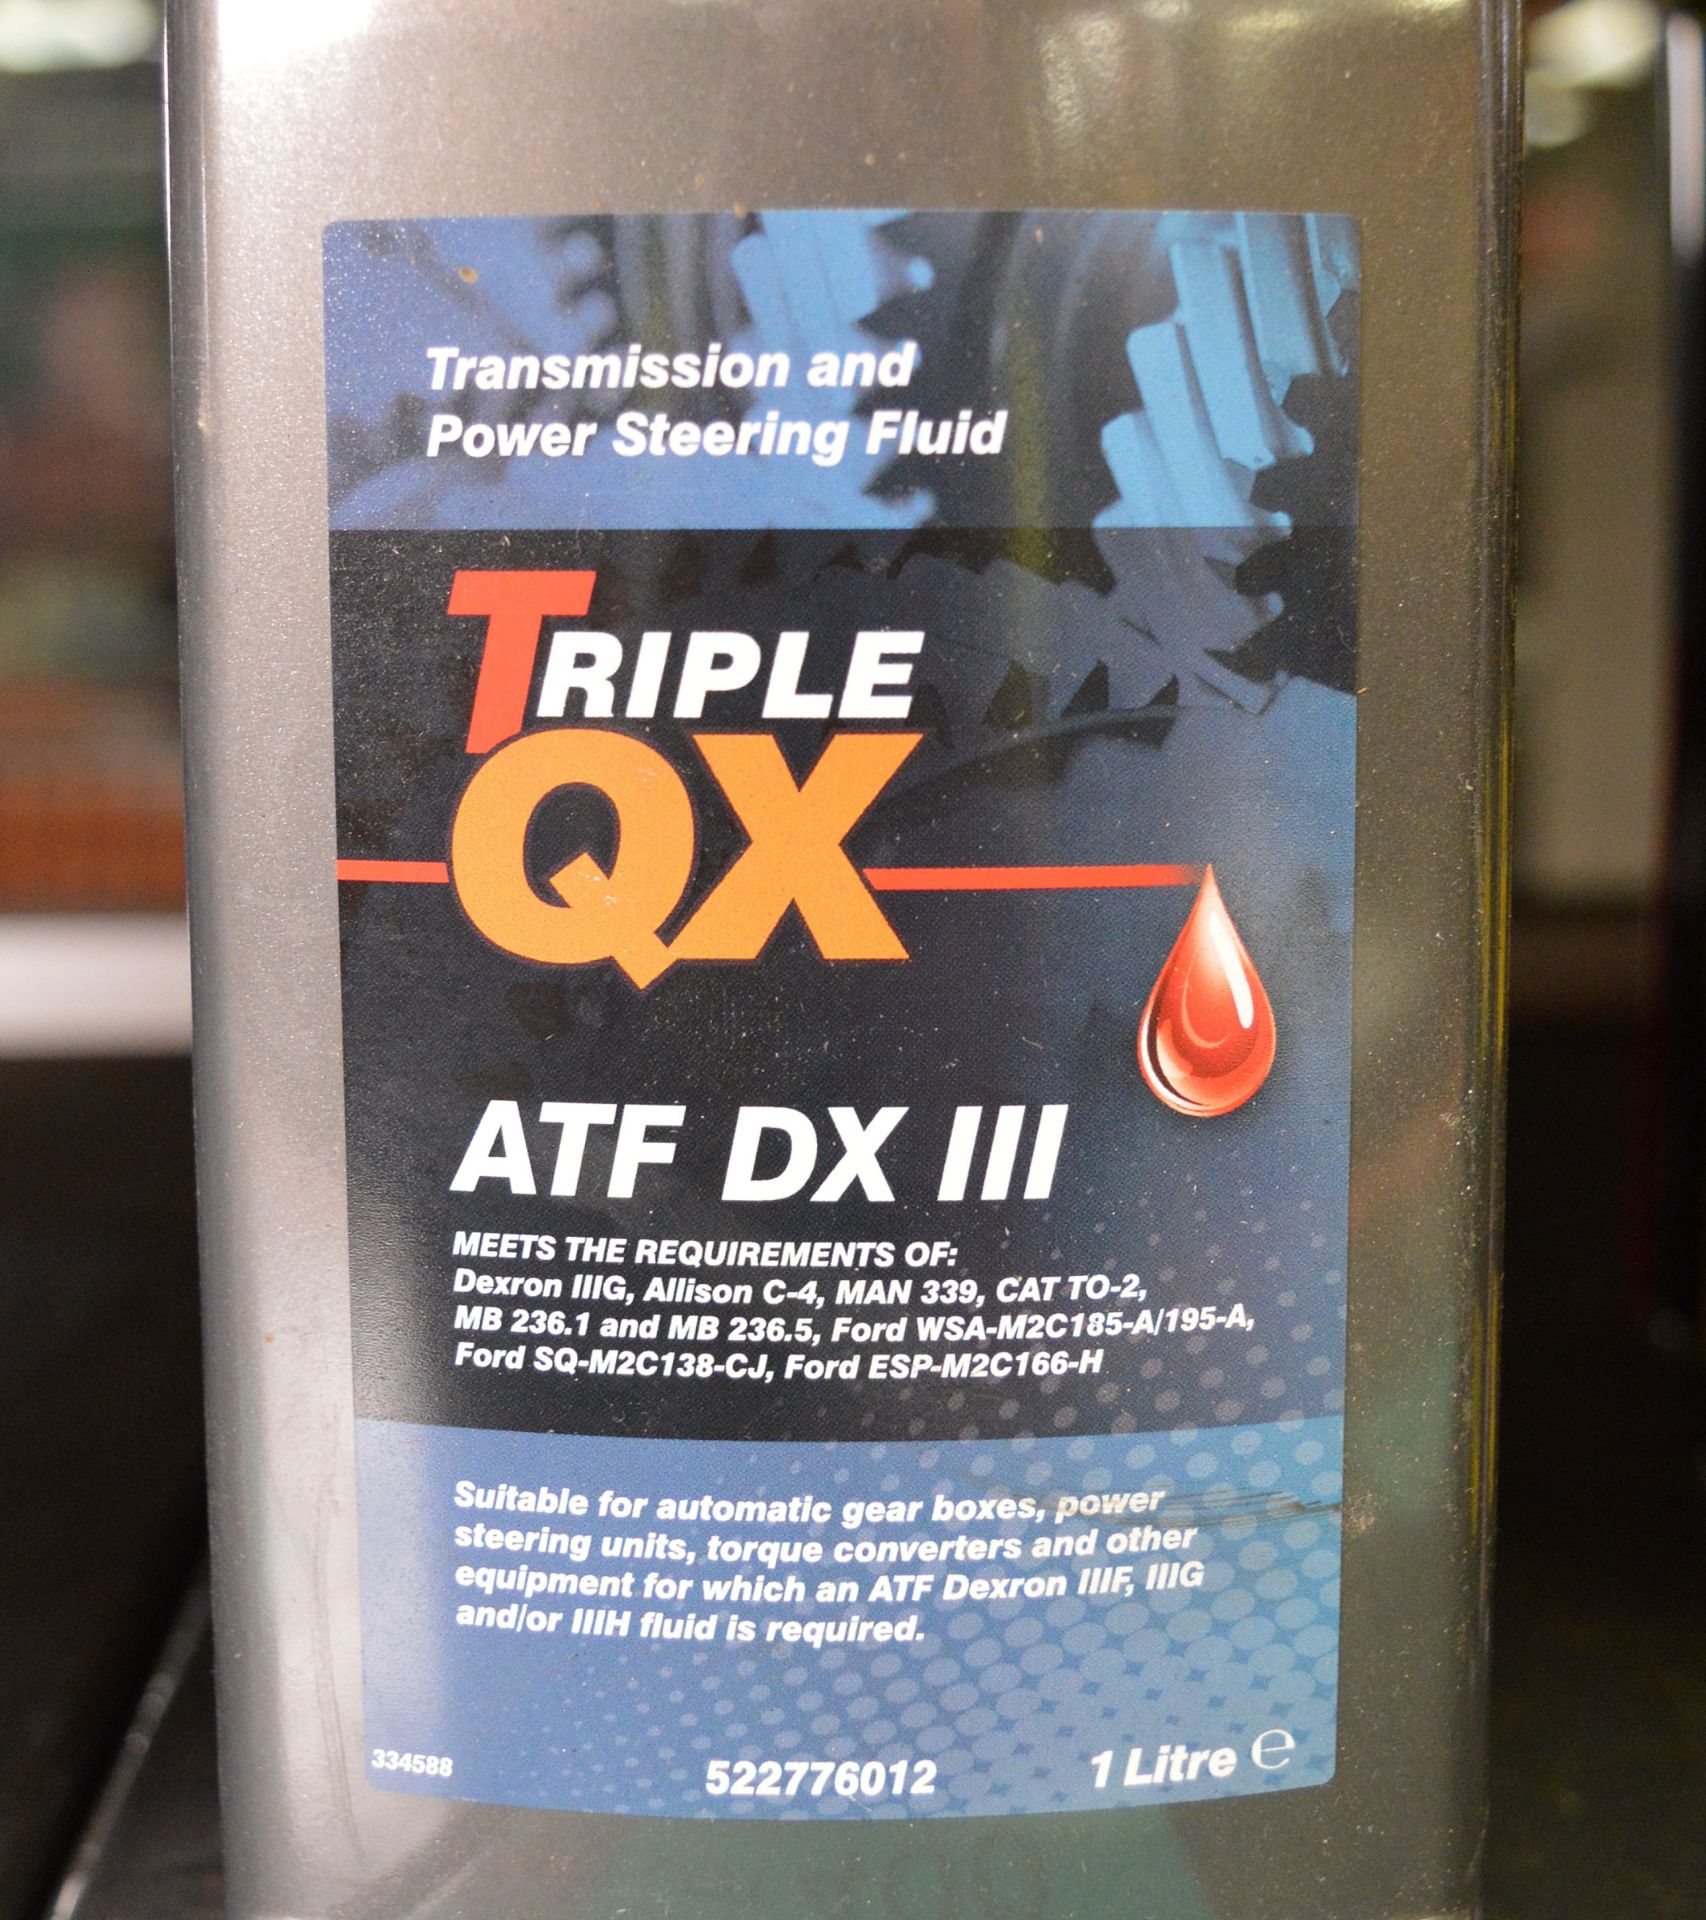 4x Triple QX ATF DX III Transmission & Power Steering Fluid - 1 litre - Image 2 of 2